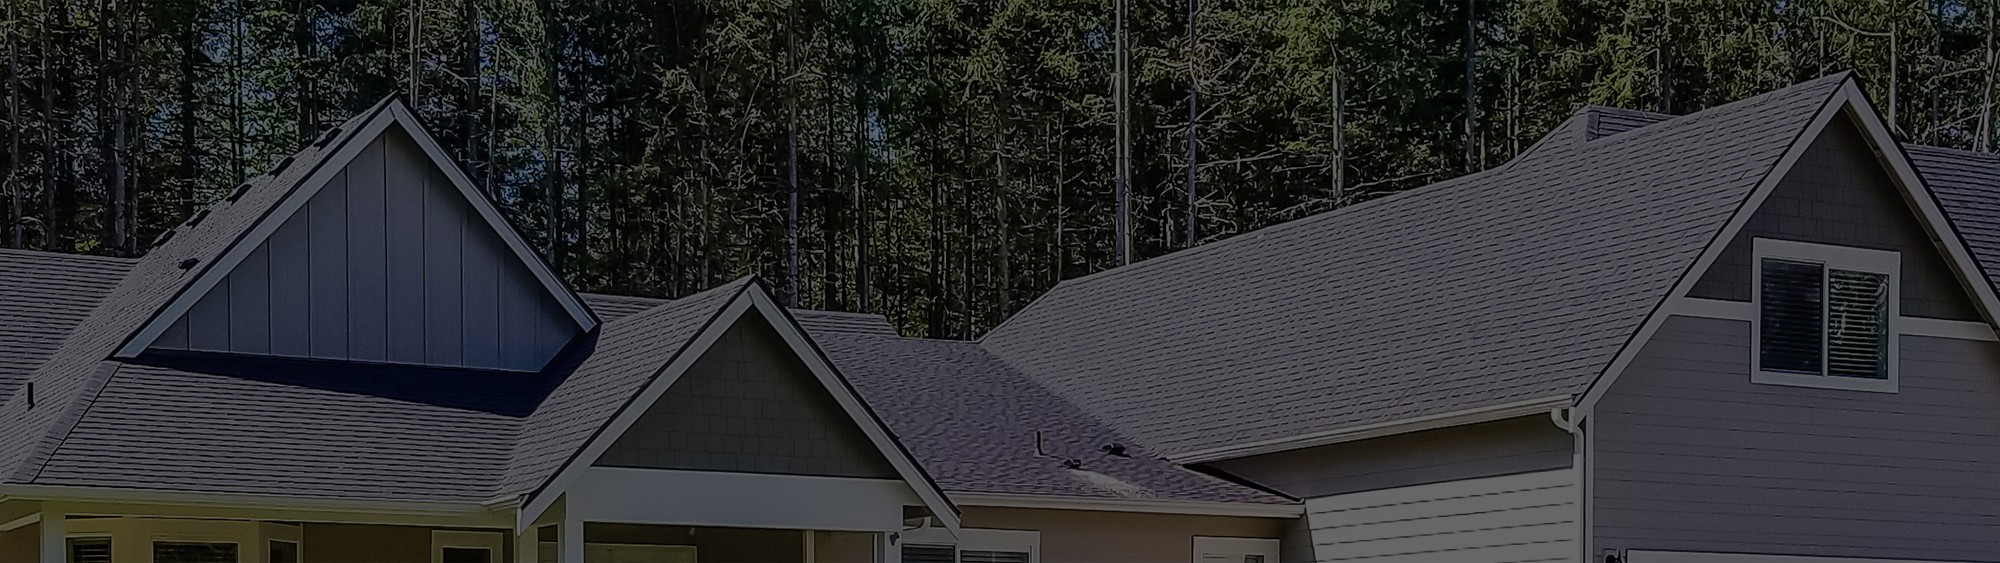 Roofing Company in Vancouver, Washington